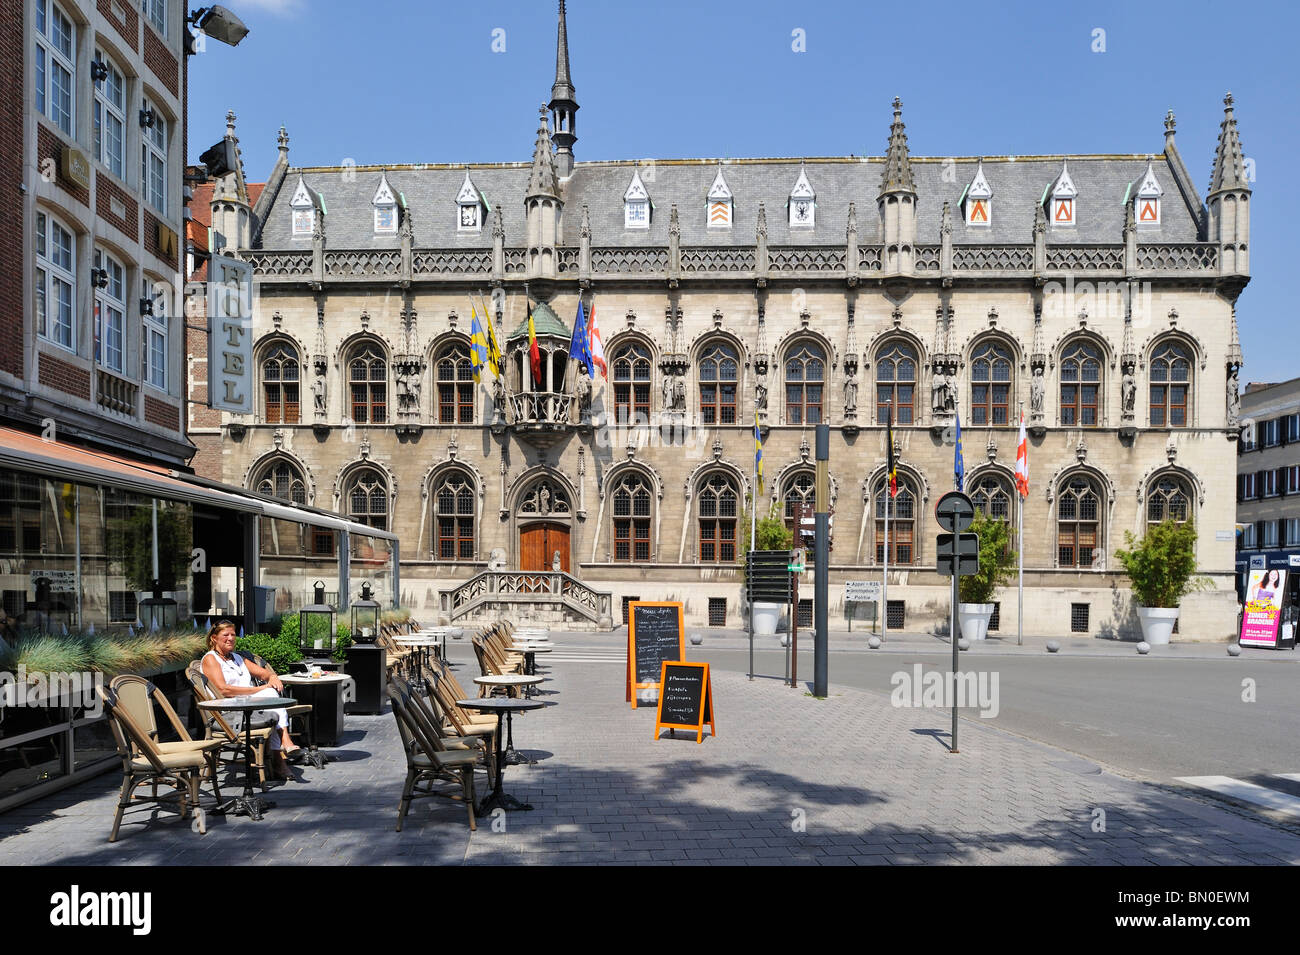 The medieval City Hall and tourists enjoying a drink at pavement café on the main square, Kortrijk, Belgium Stock Photo